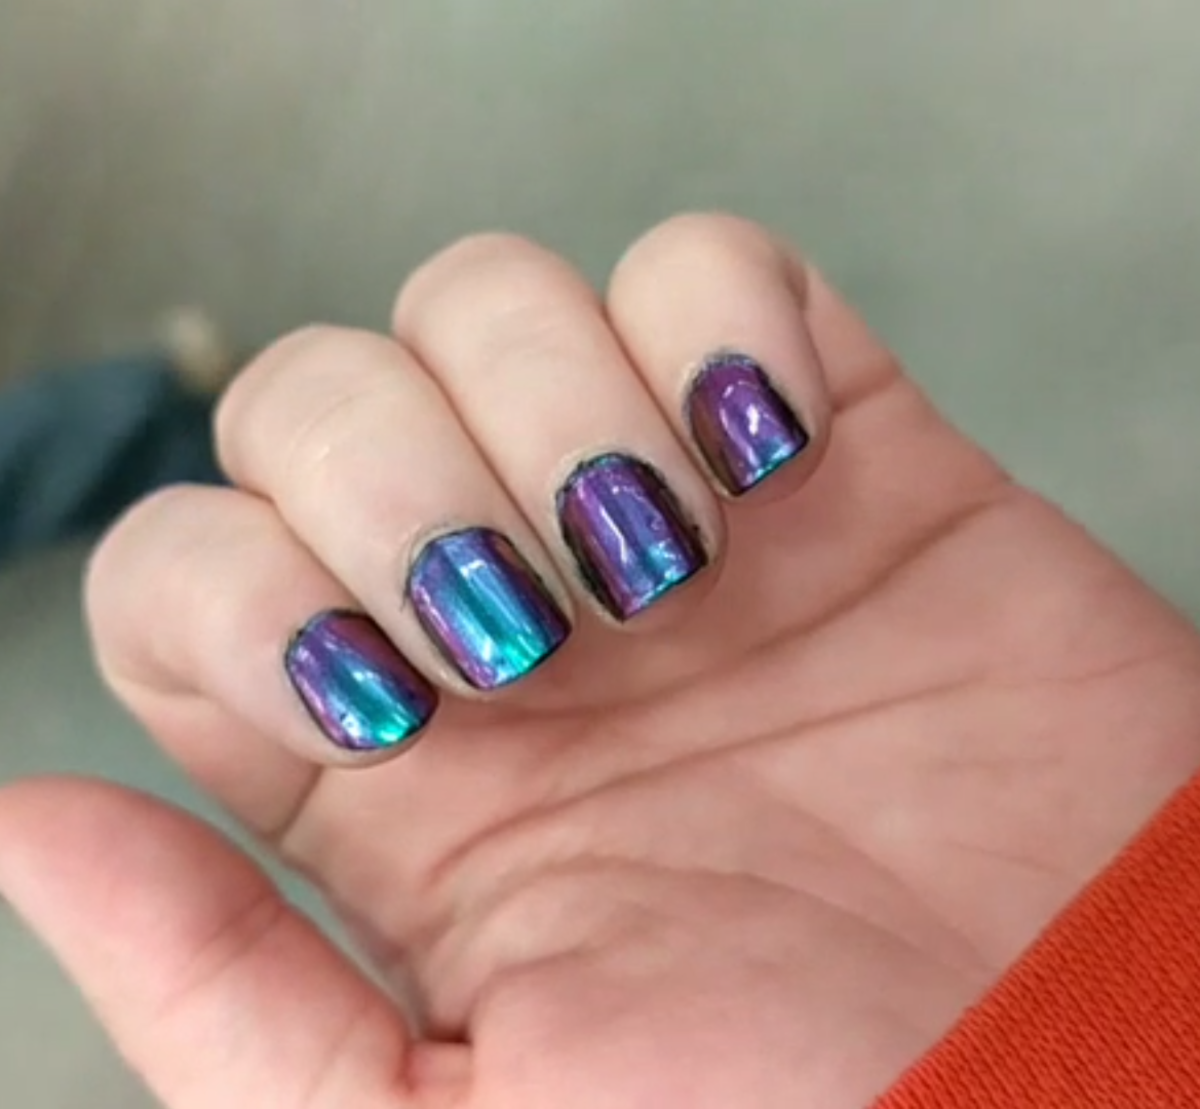 Finished multichrome nails!